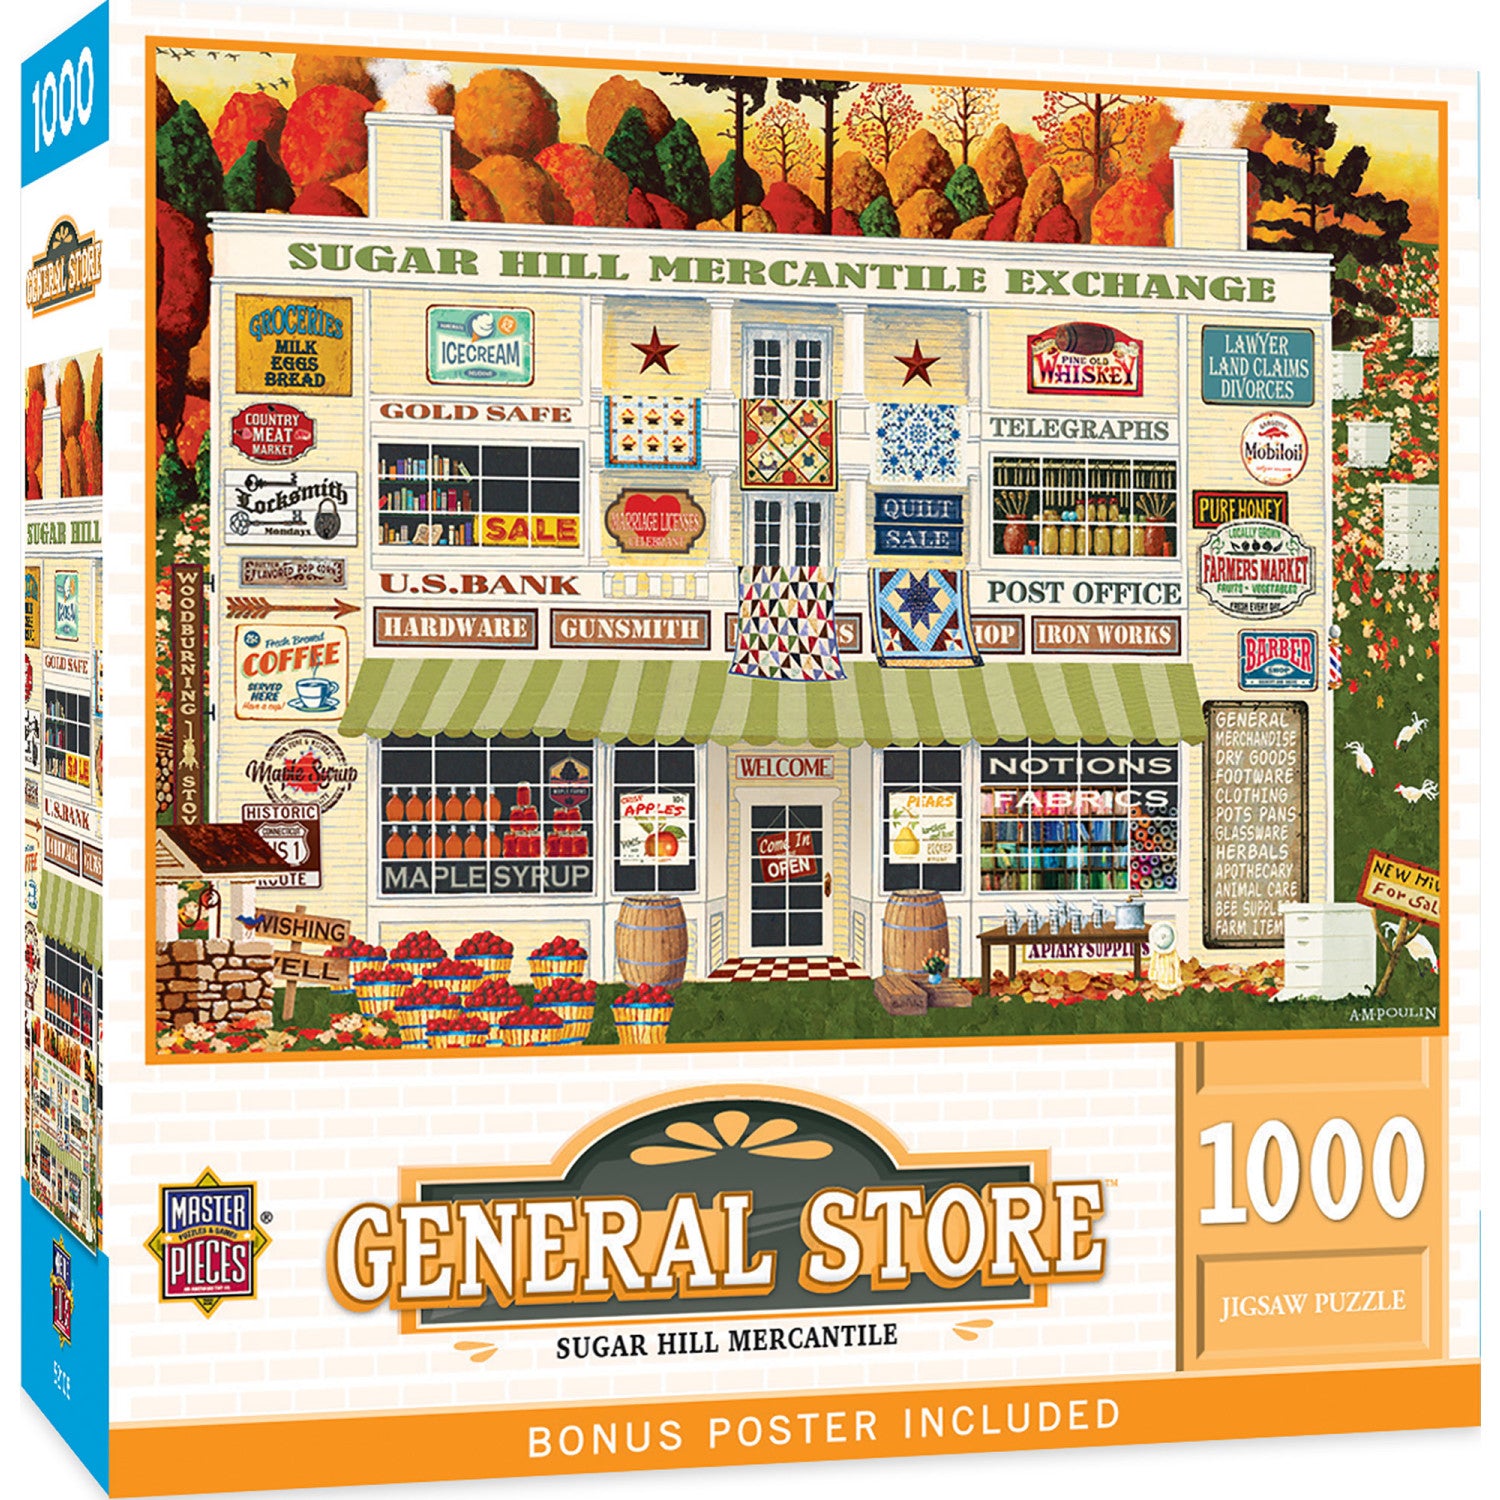 General Store - Sugar Hill Mercantile 1000 Piece Jigsaw Puzzle